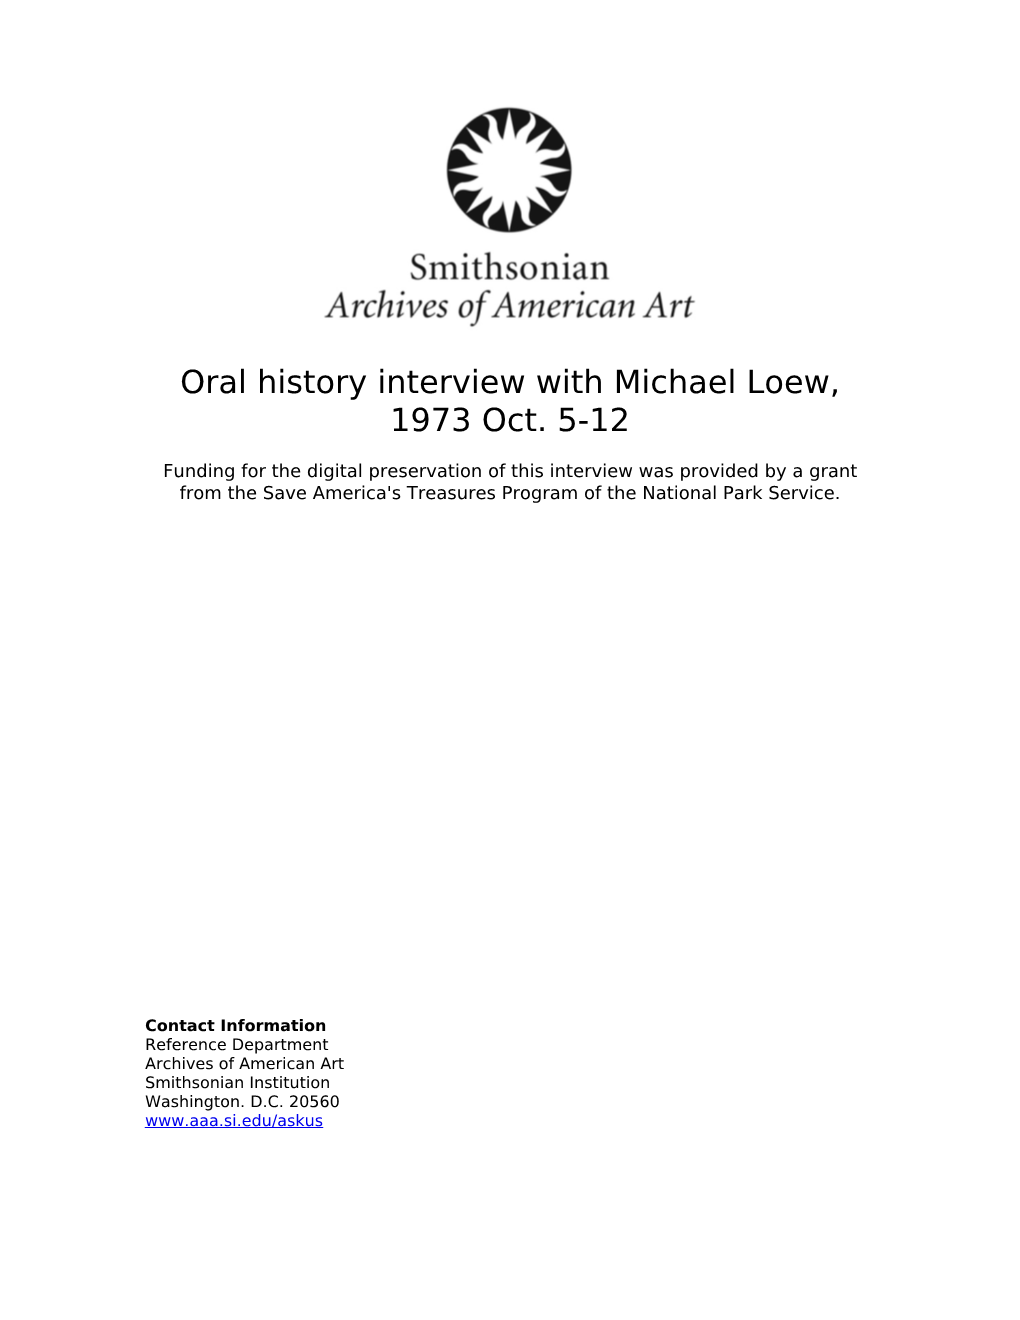 Oral History Interview with Michael Loew, 1973 Oct. 5-12